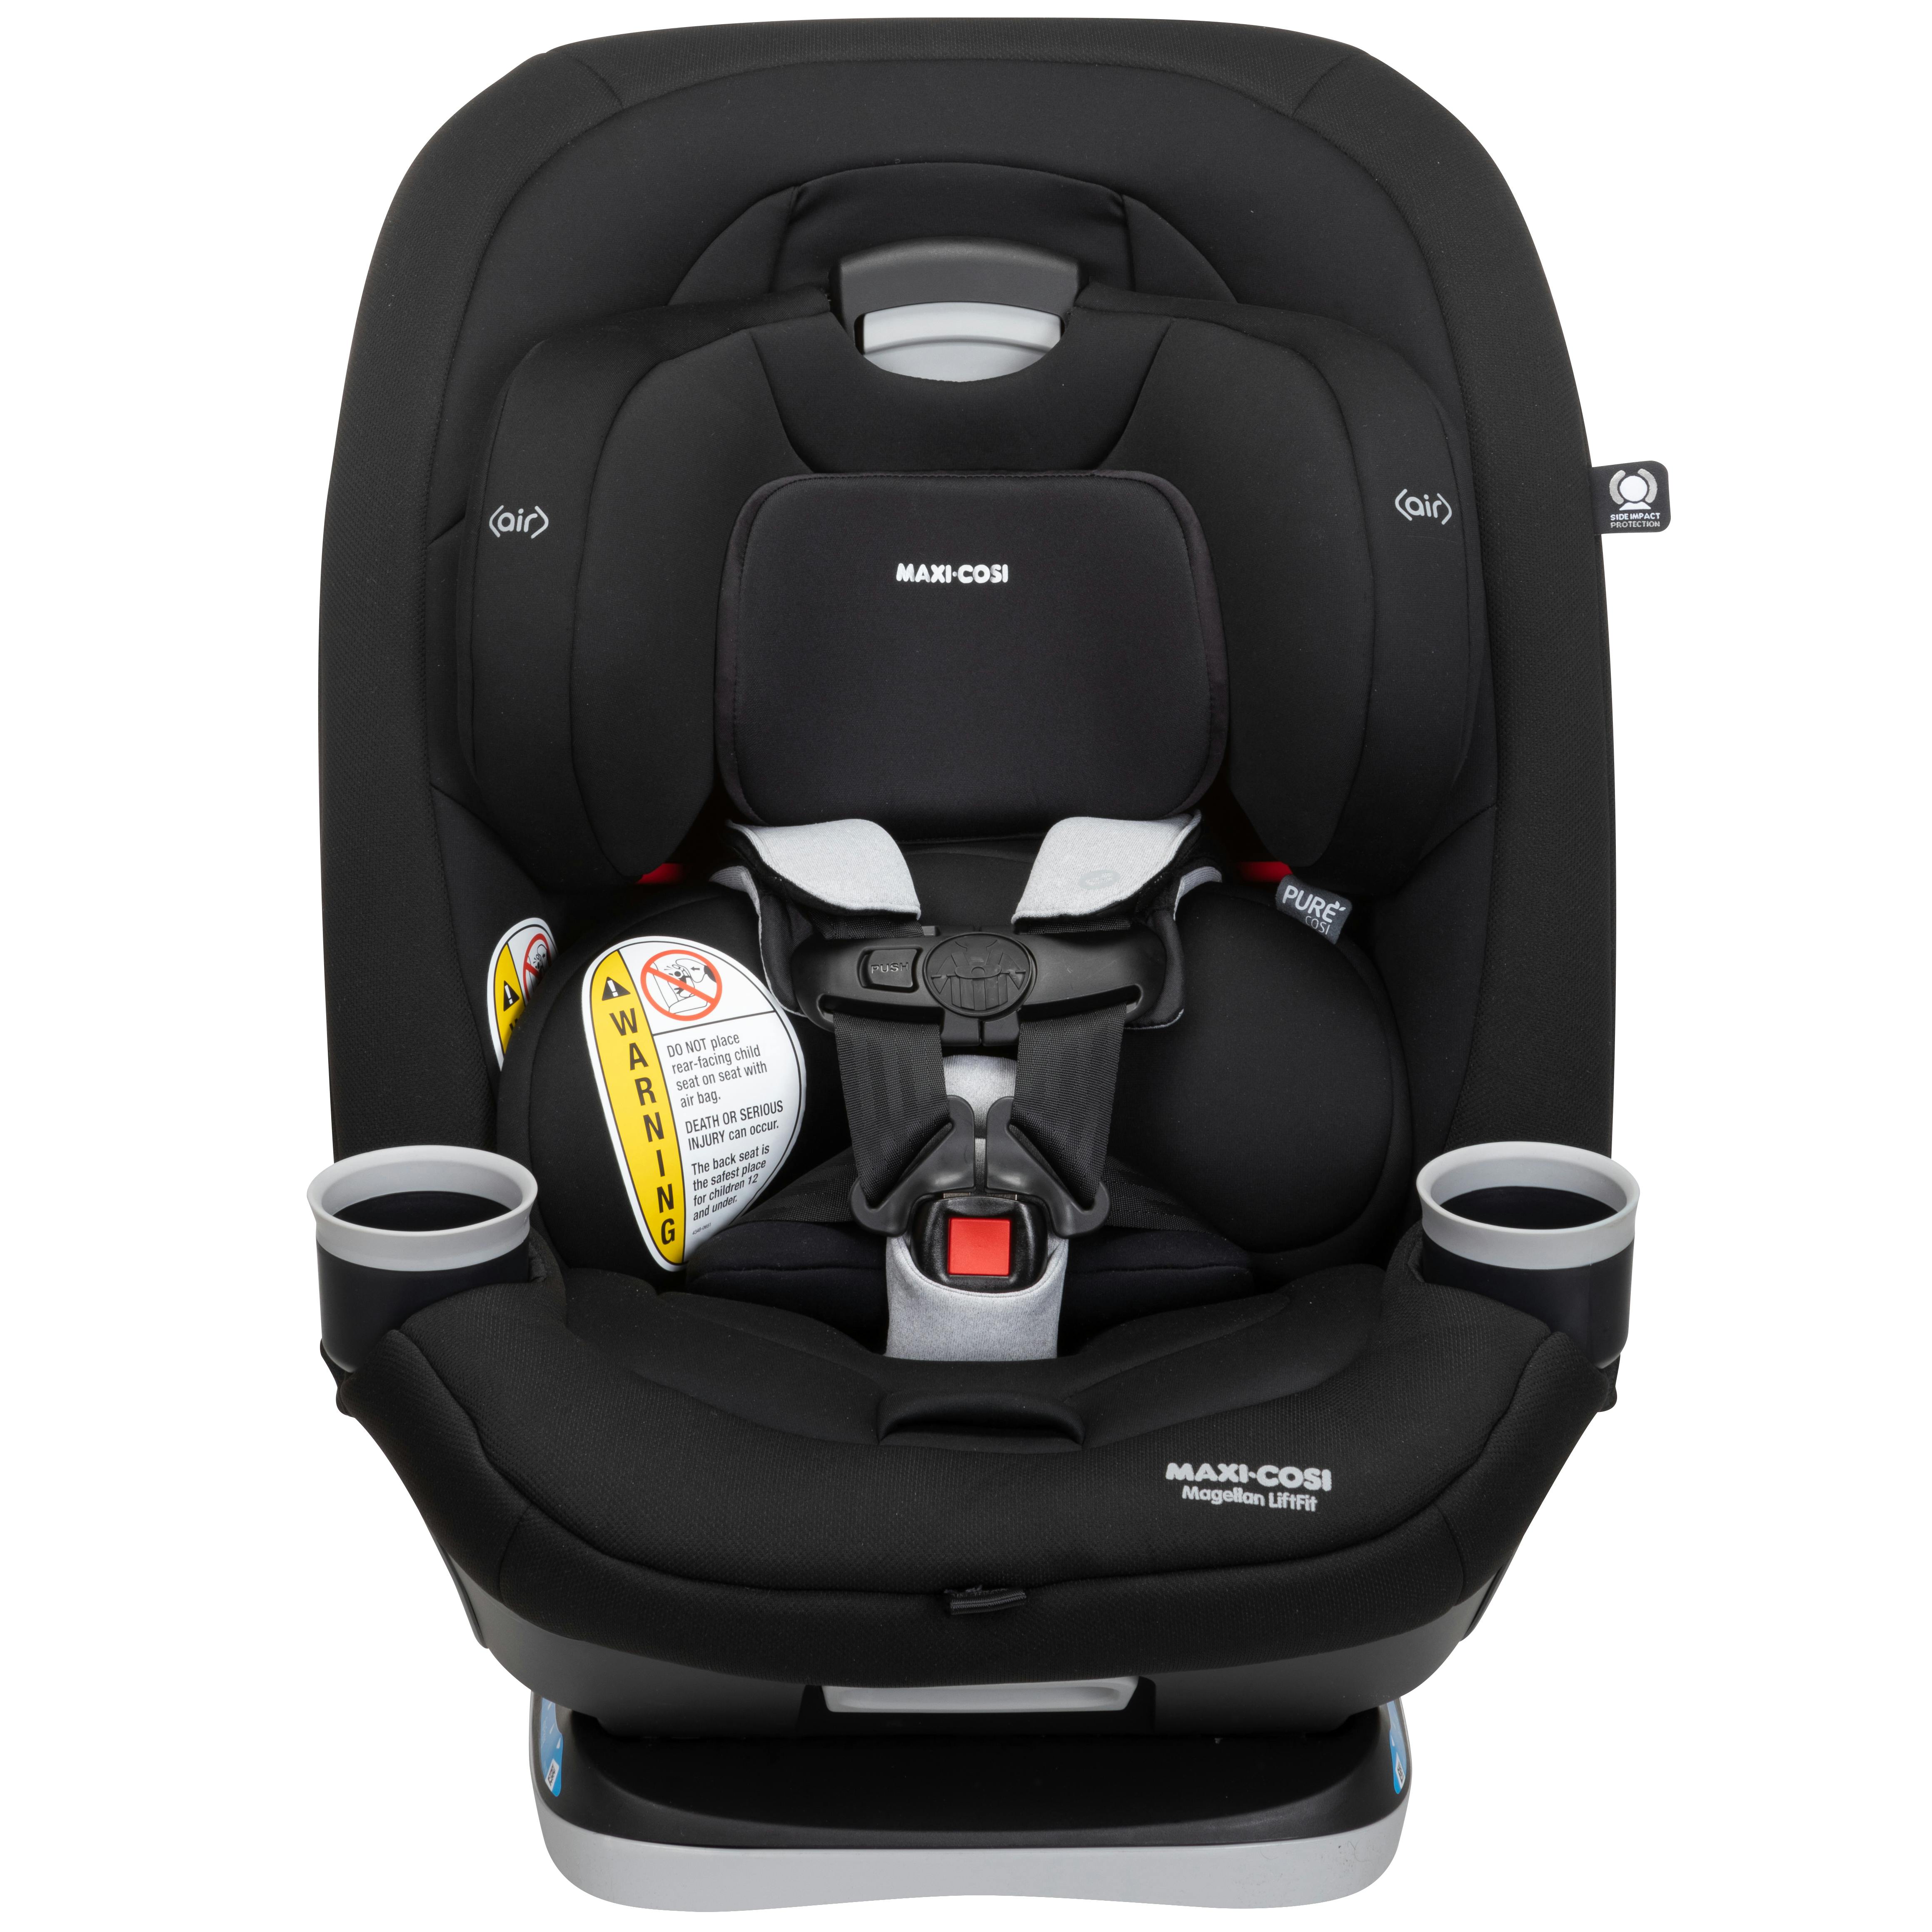 NEW Maxi Cosi Coral XP Infant Car Seat - Full In-Depth Review + First